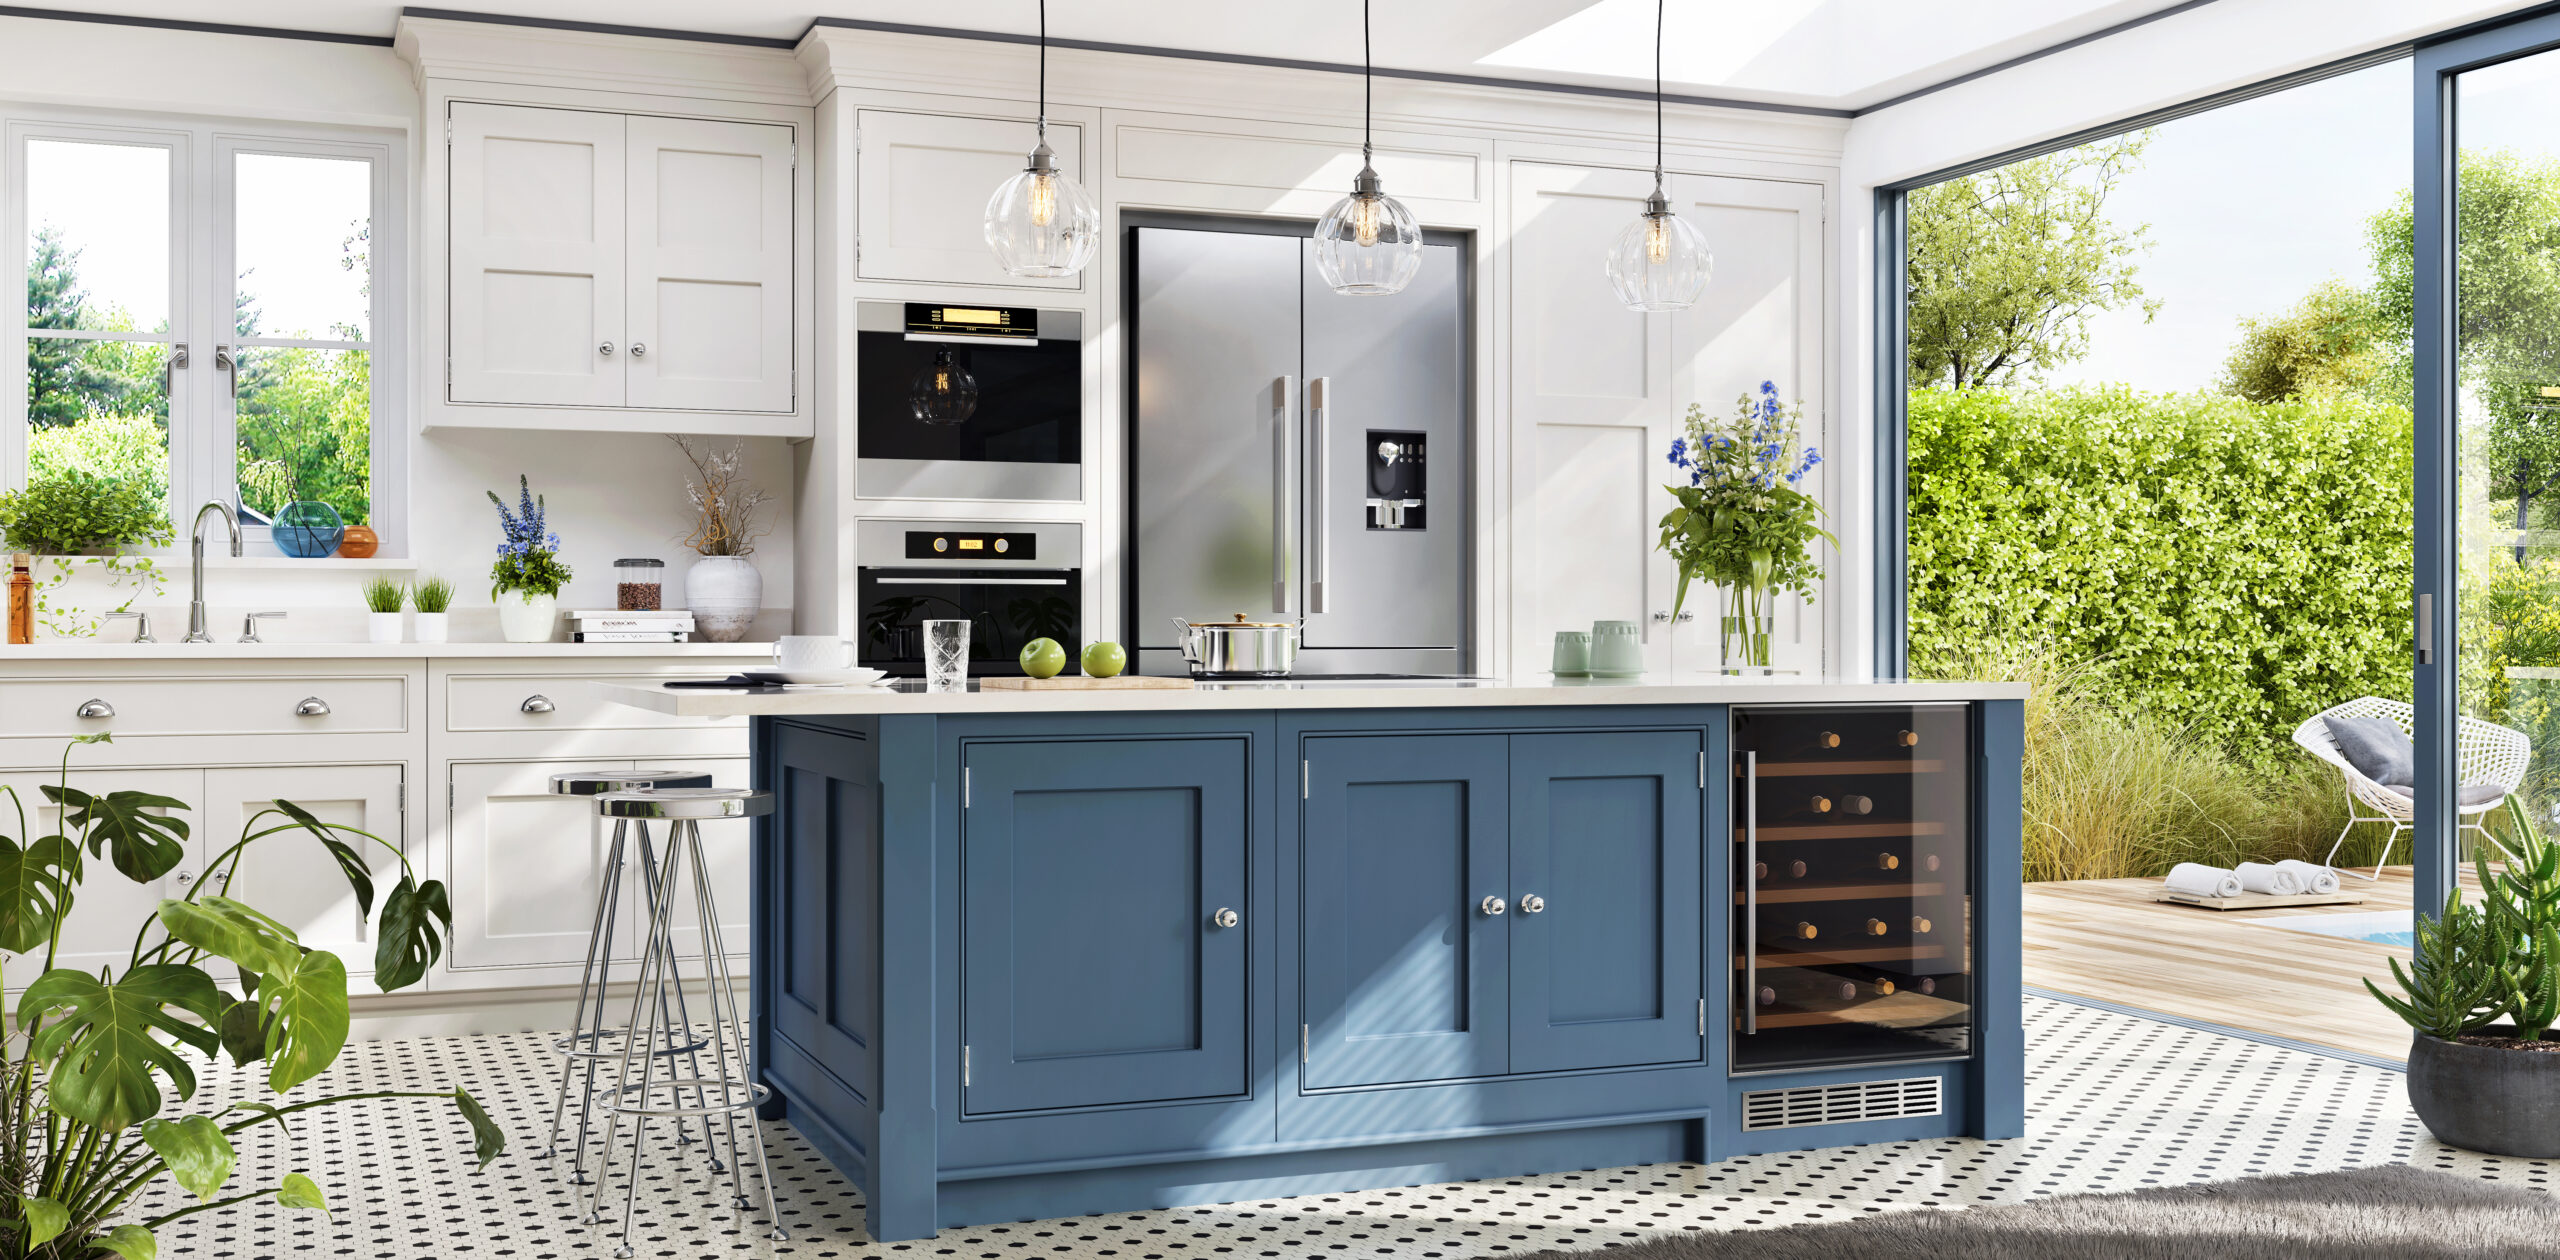 Bright sunny kitchen with blue island and slider